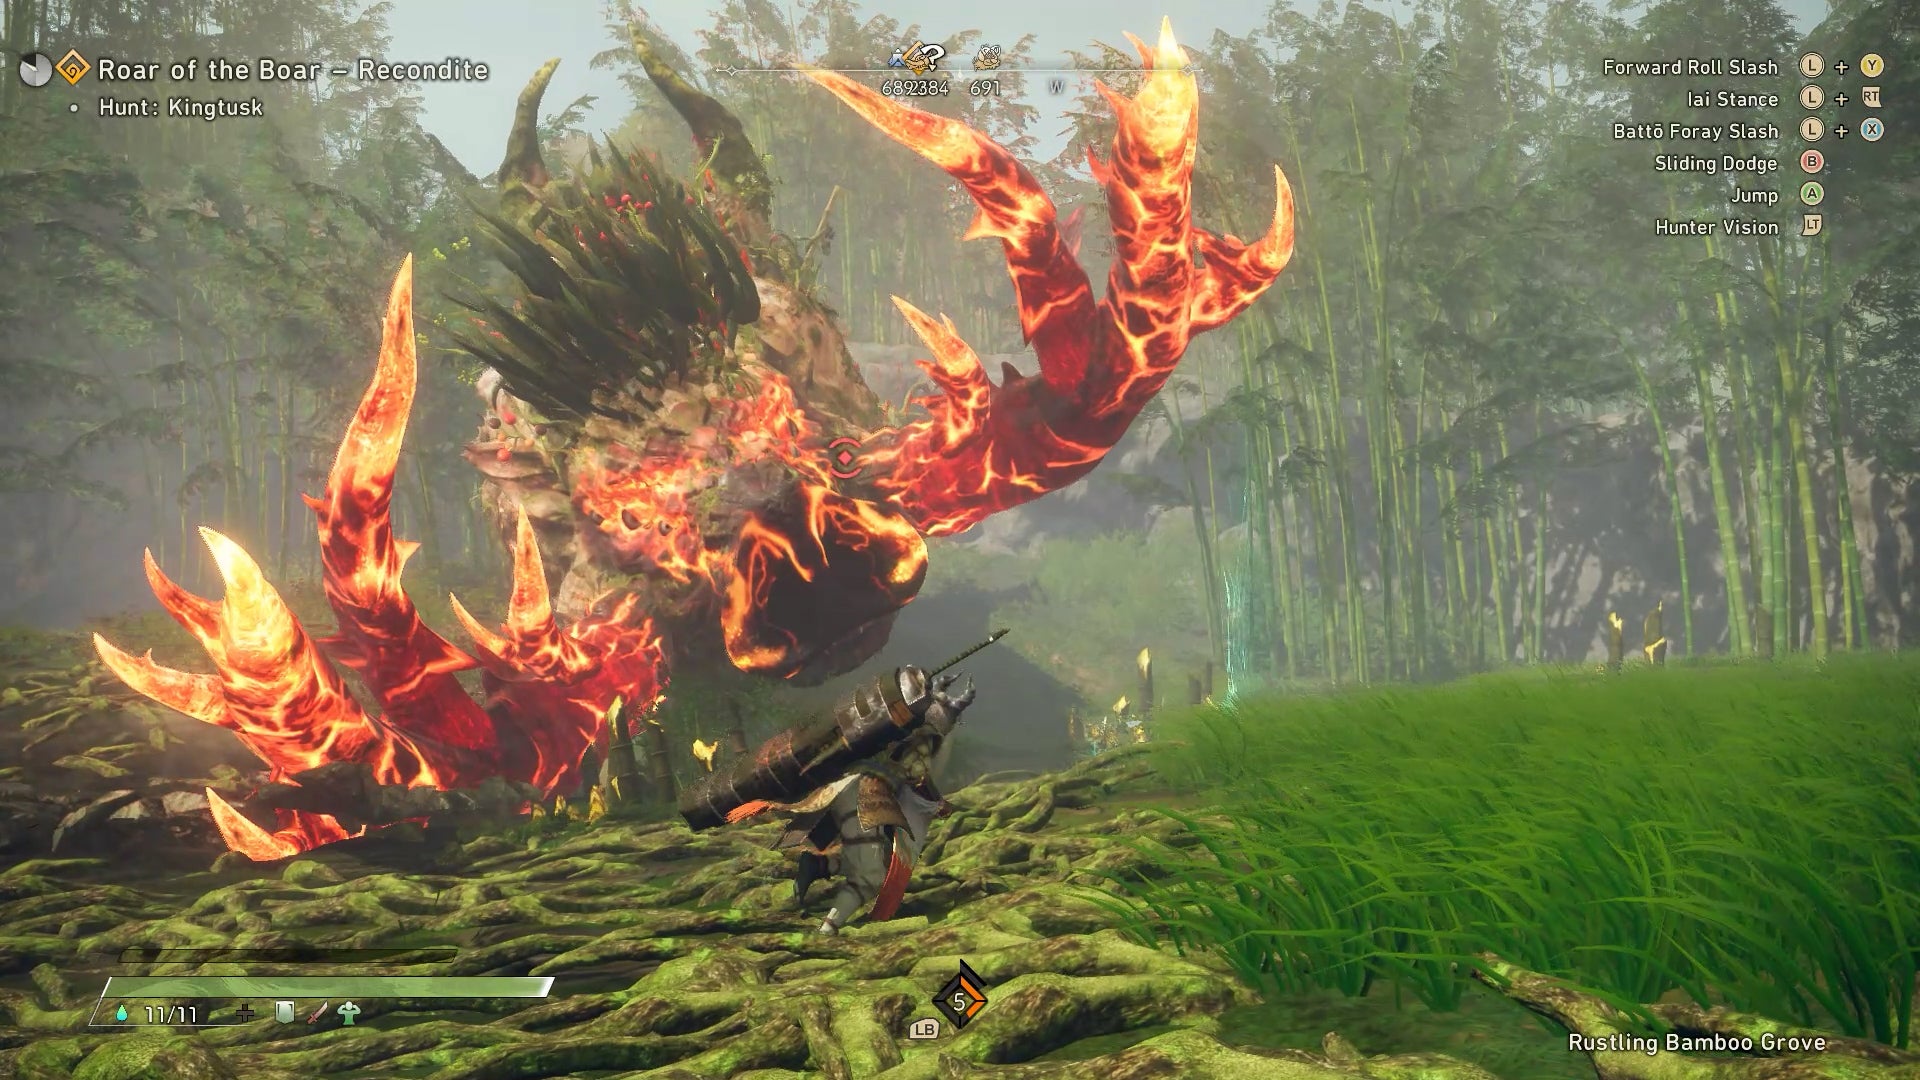 A large pig with flaming tusks charges towards the player in a bamboo forest.